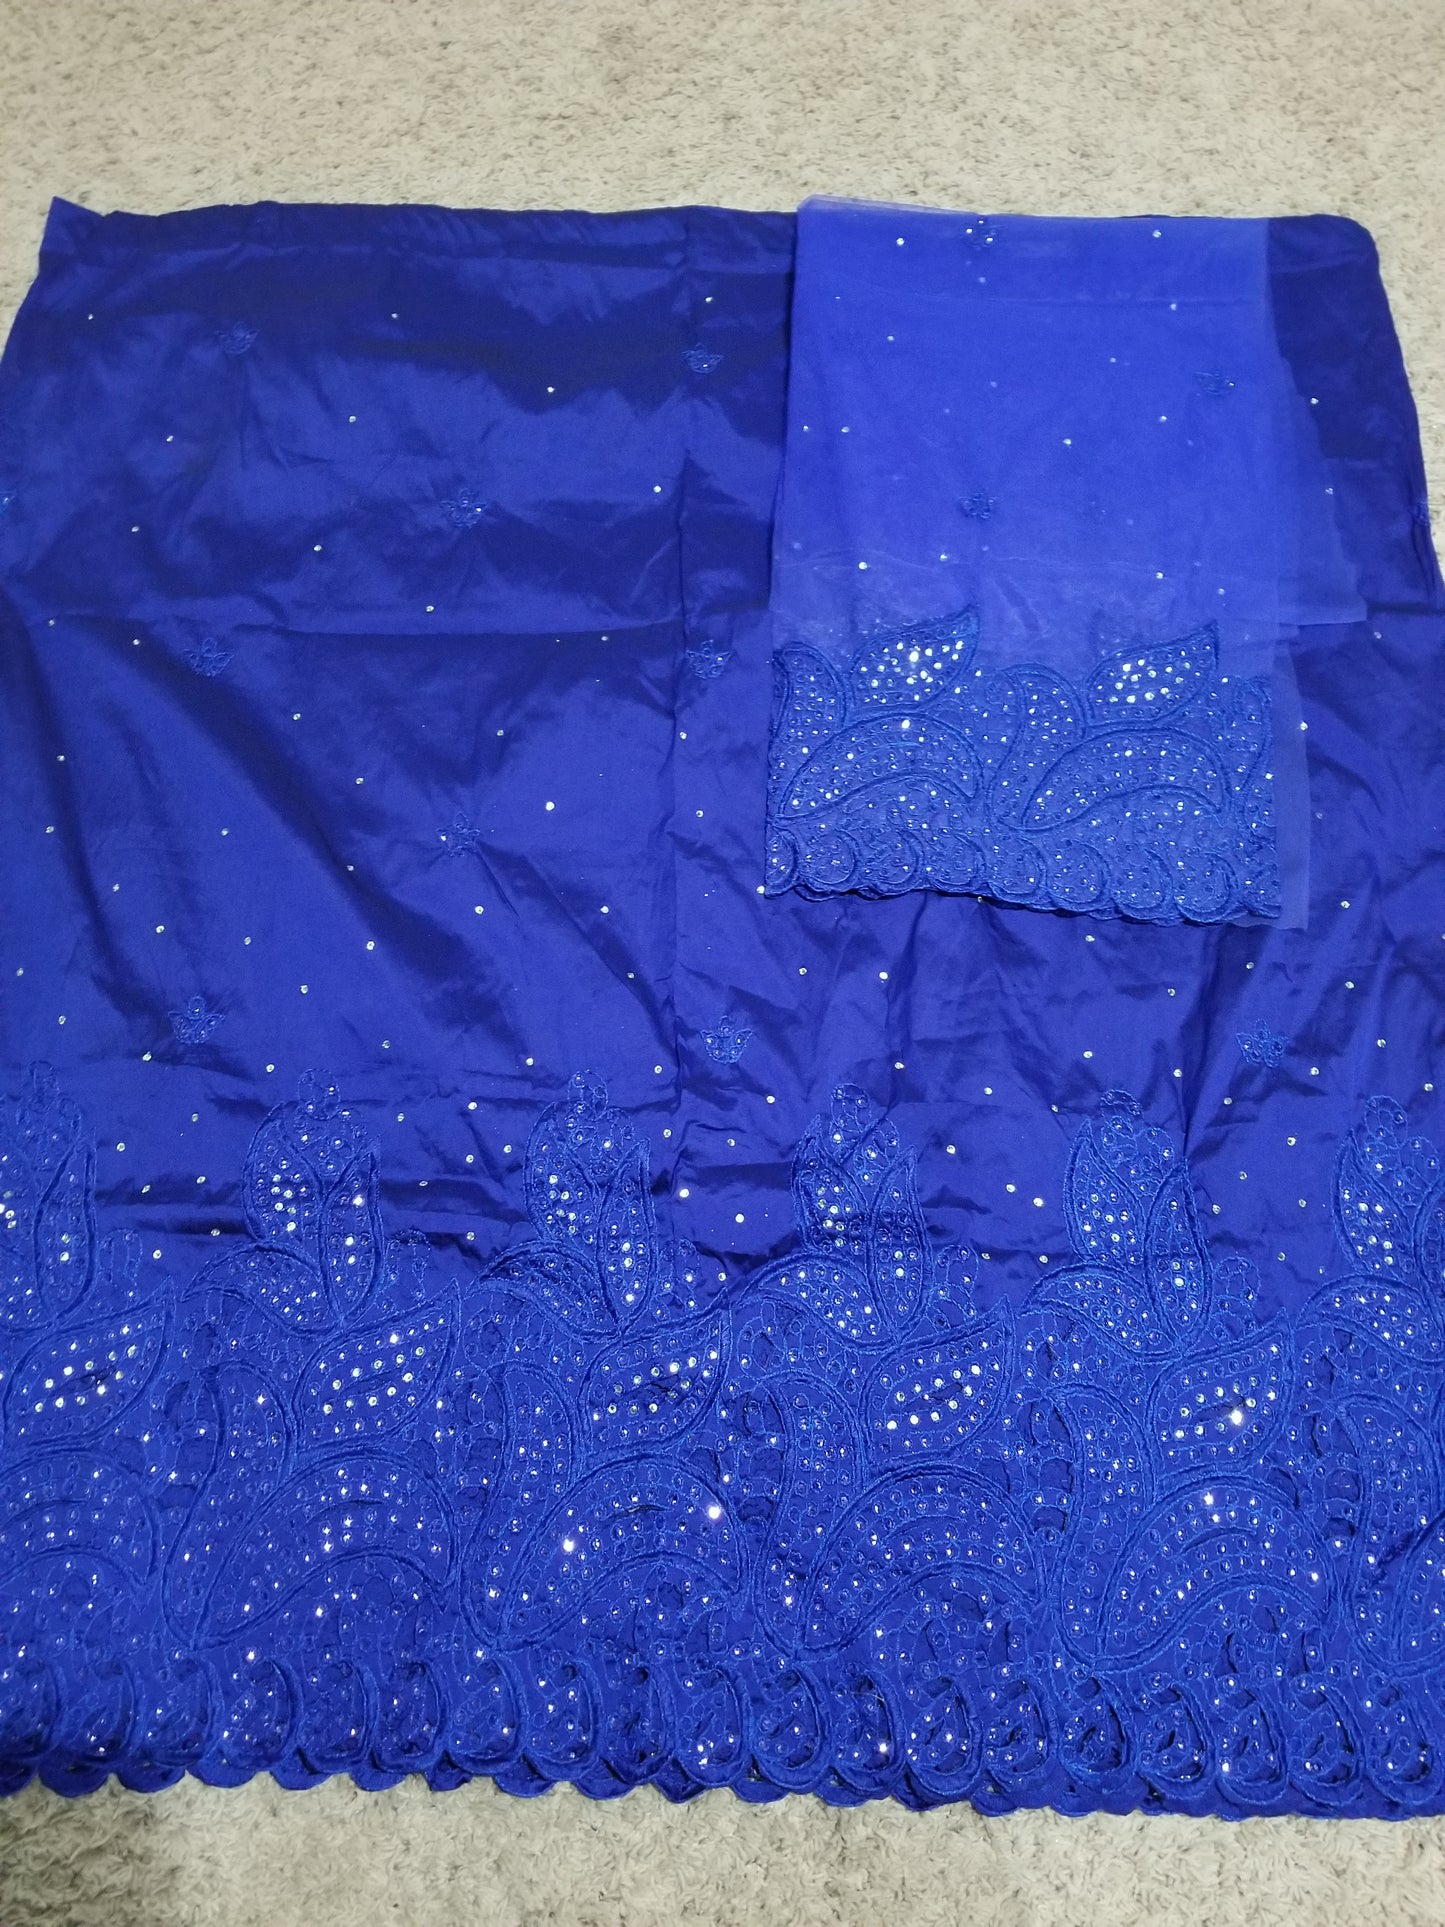 Special sale of quality royal blue  Embroidery silk George wrapper + net blouse. Small-George. Sold as a set of 5yds wrapper and 1.8yds matching blouse